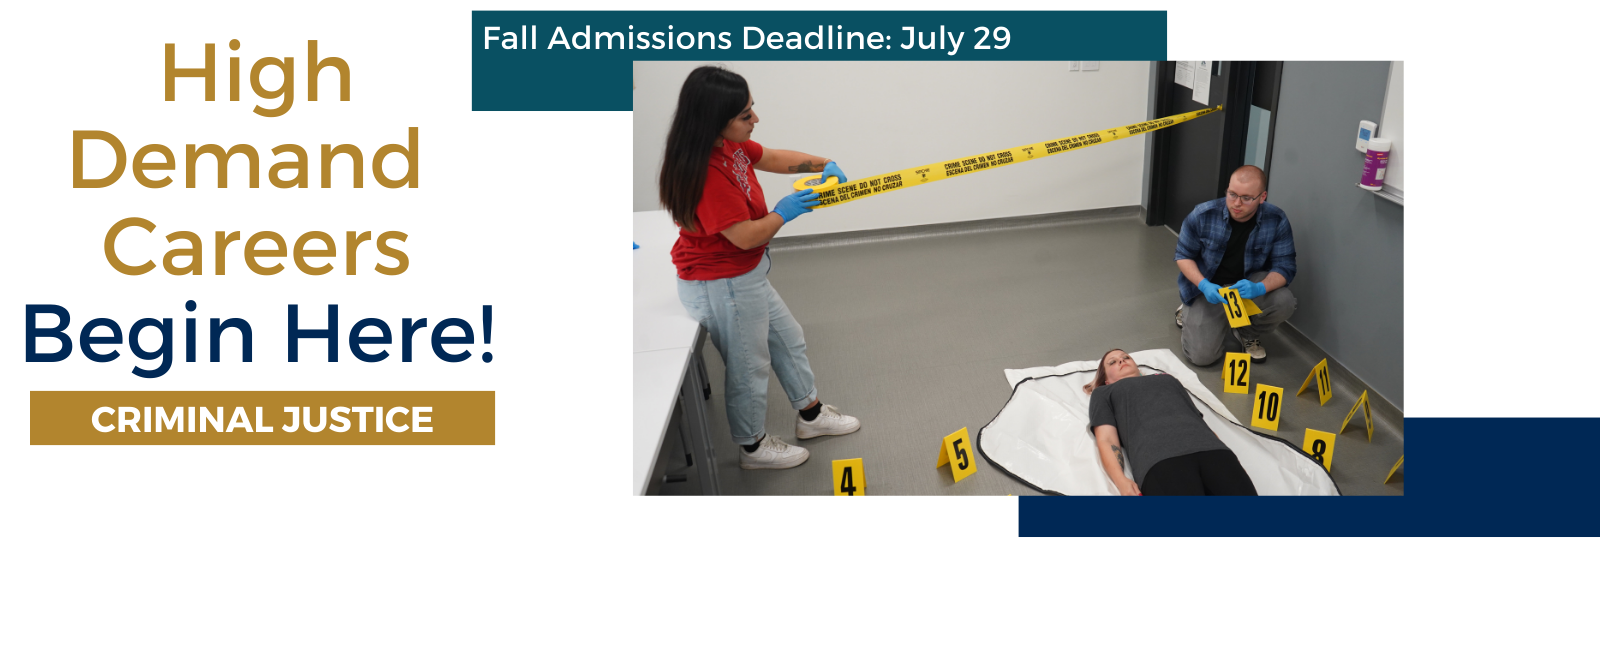 High Demand Careers Begin Here! Criminal Justice
Fall Admissions Deadline: July 29